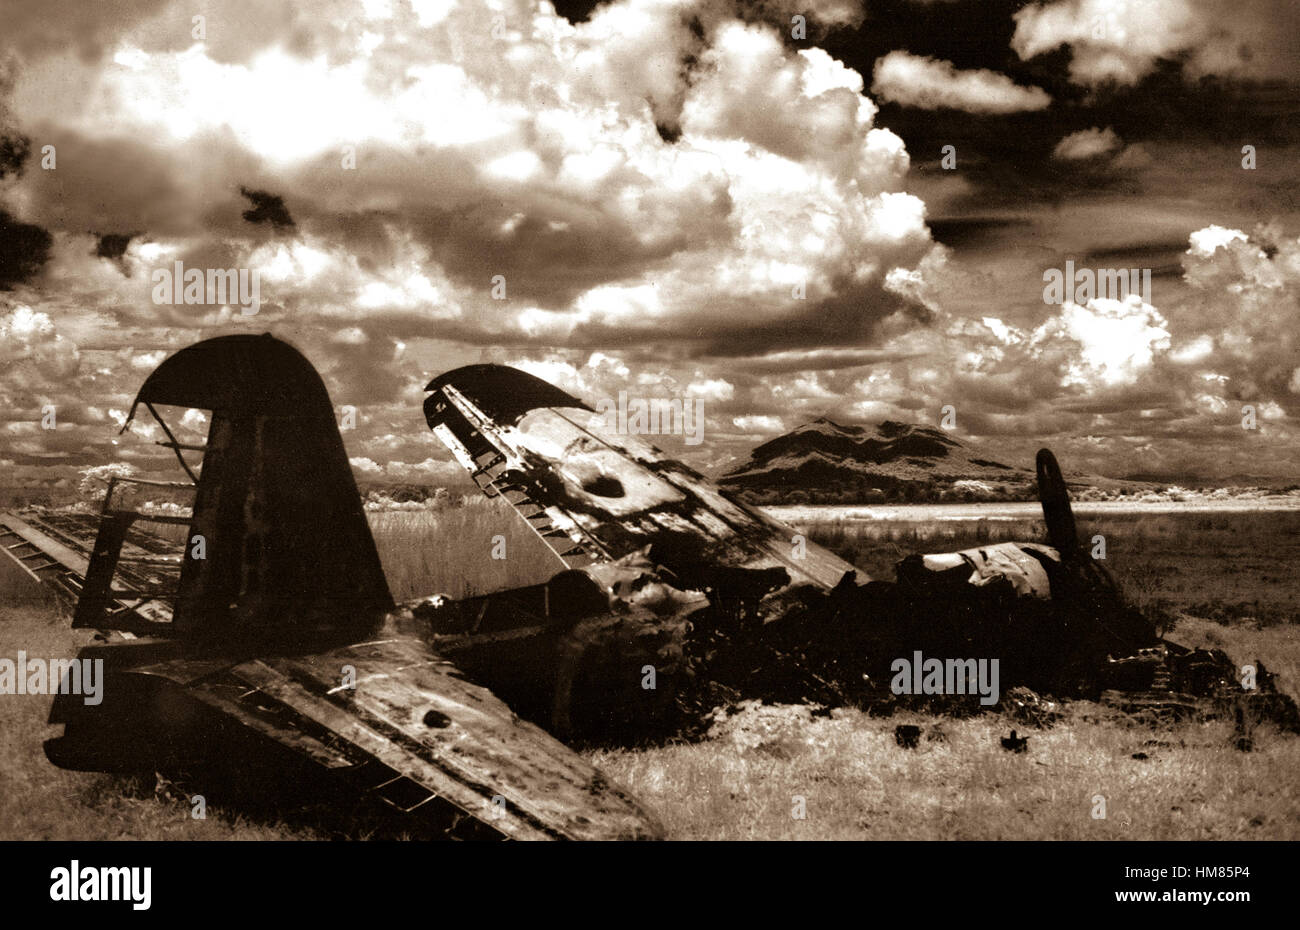 Infra red view of wrecked Jap plane near Angeles, Pampanga, on Luzon, P.I.  In the background is Mt. Arayat, some 10 to 15 miles away.  May 29, 1945.  S.Sgt. Harry Young.  (Army) NARA FILE #:  111-SC-209733 WAR & CONFLICT BOOK #:  1319 Stock Photo